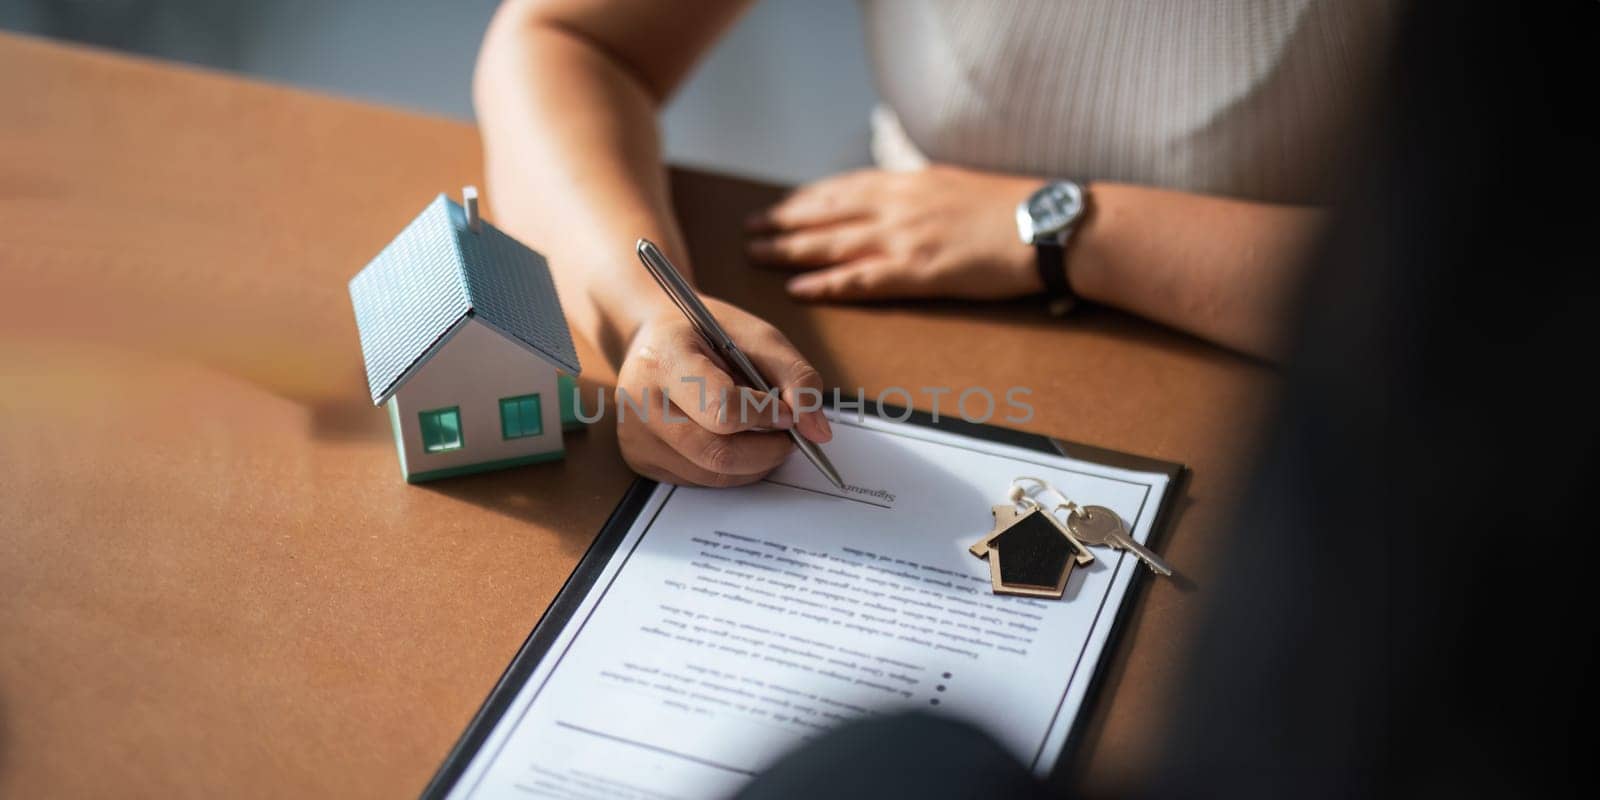 Real estate agent to his discussion and consult about house contracts client after signing contract, concept for real estate, moving home or renting property.